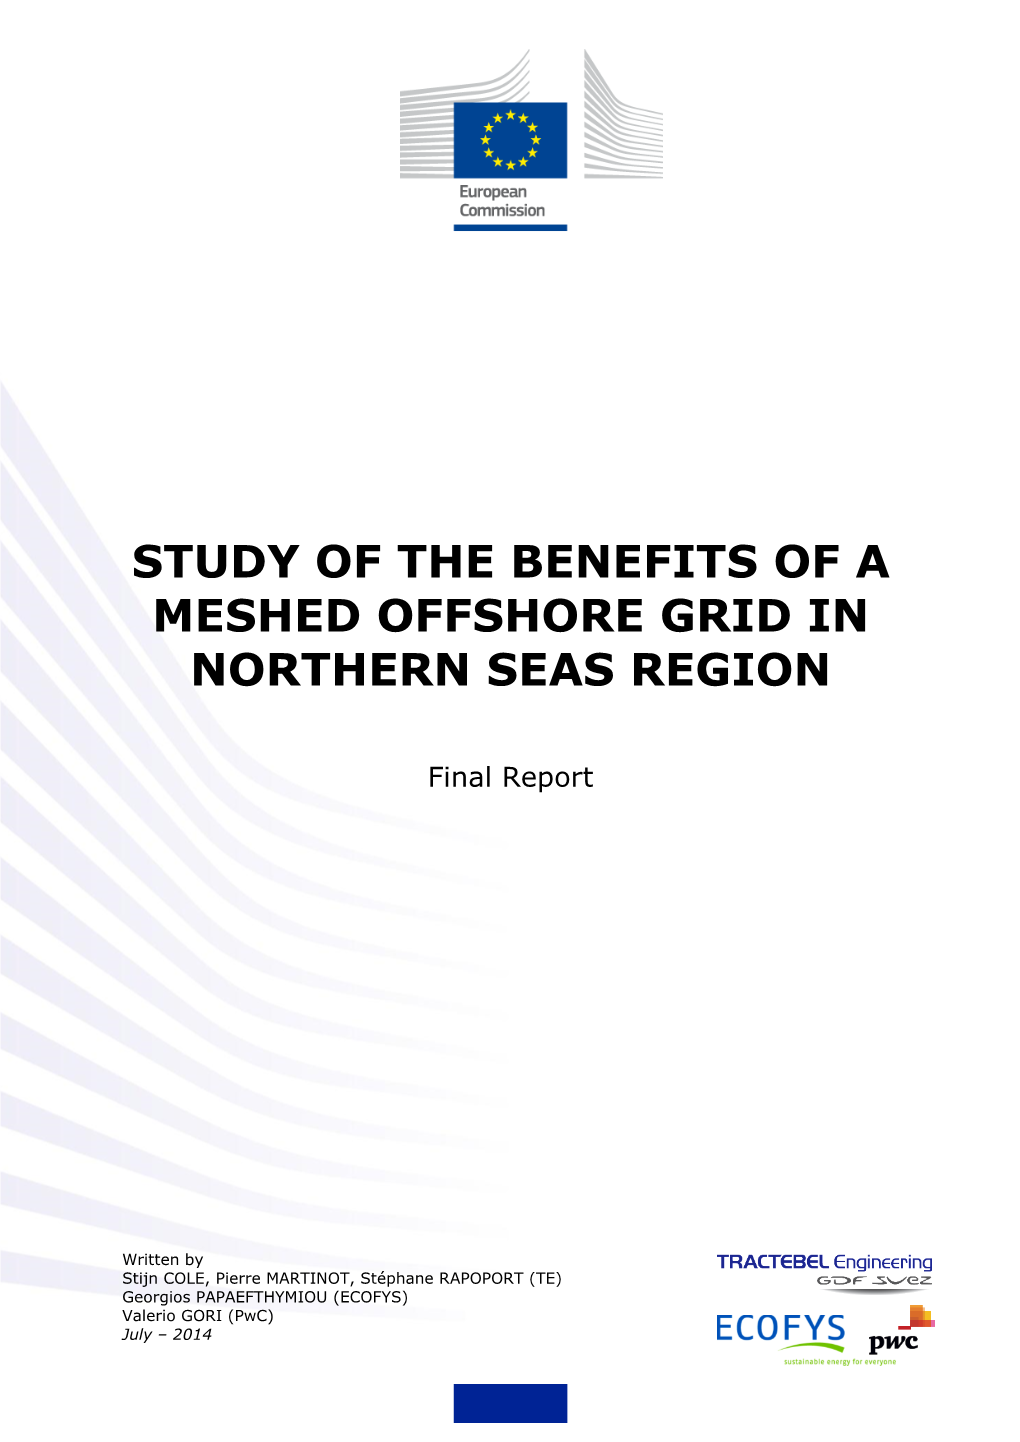 Study of the Benefits of a Meshed Offshore Grid in Northern Seas Region